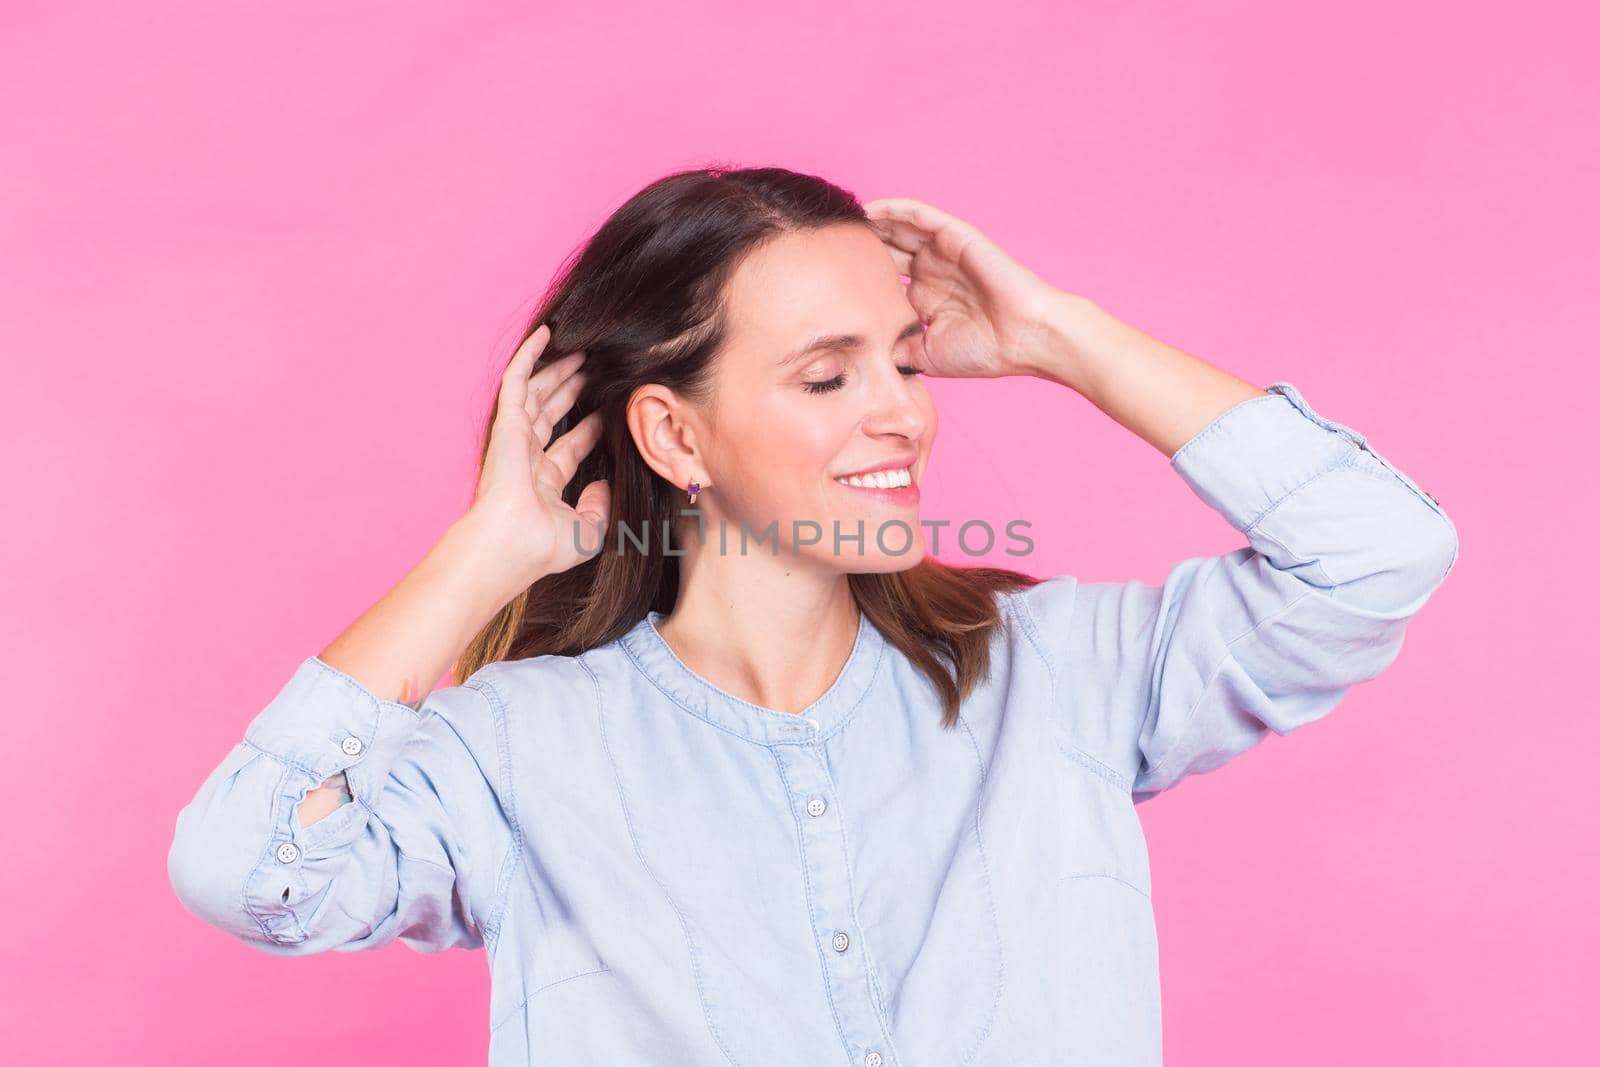 Portrait of a beautiful woman with long brown hair wearing blue cotton blouse, standing waist up smiling on a pink background by Satura86